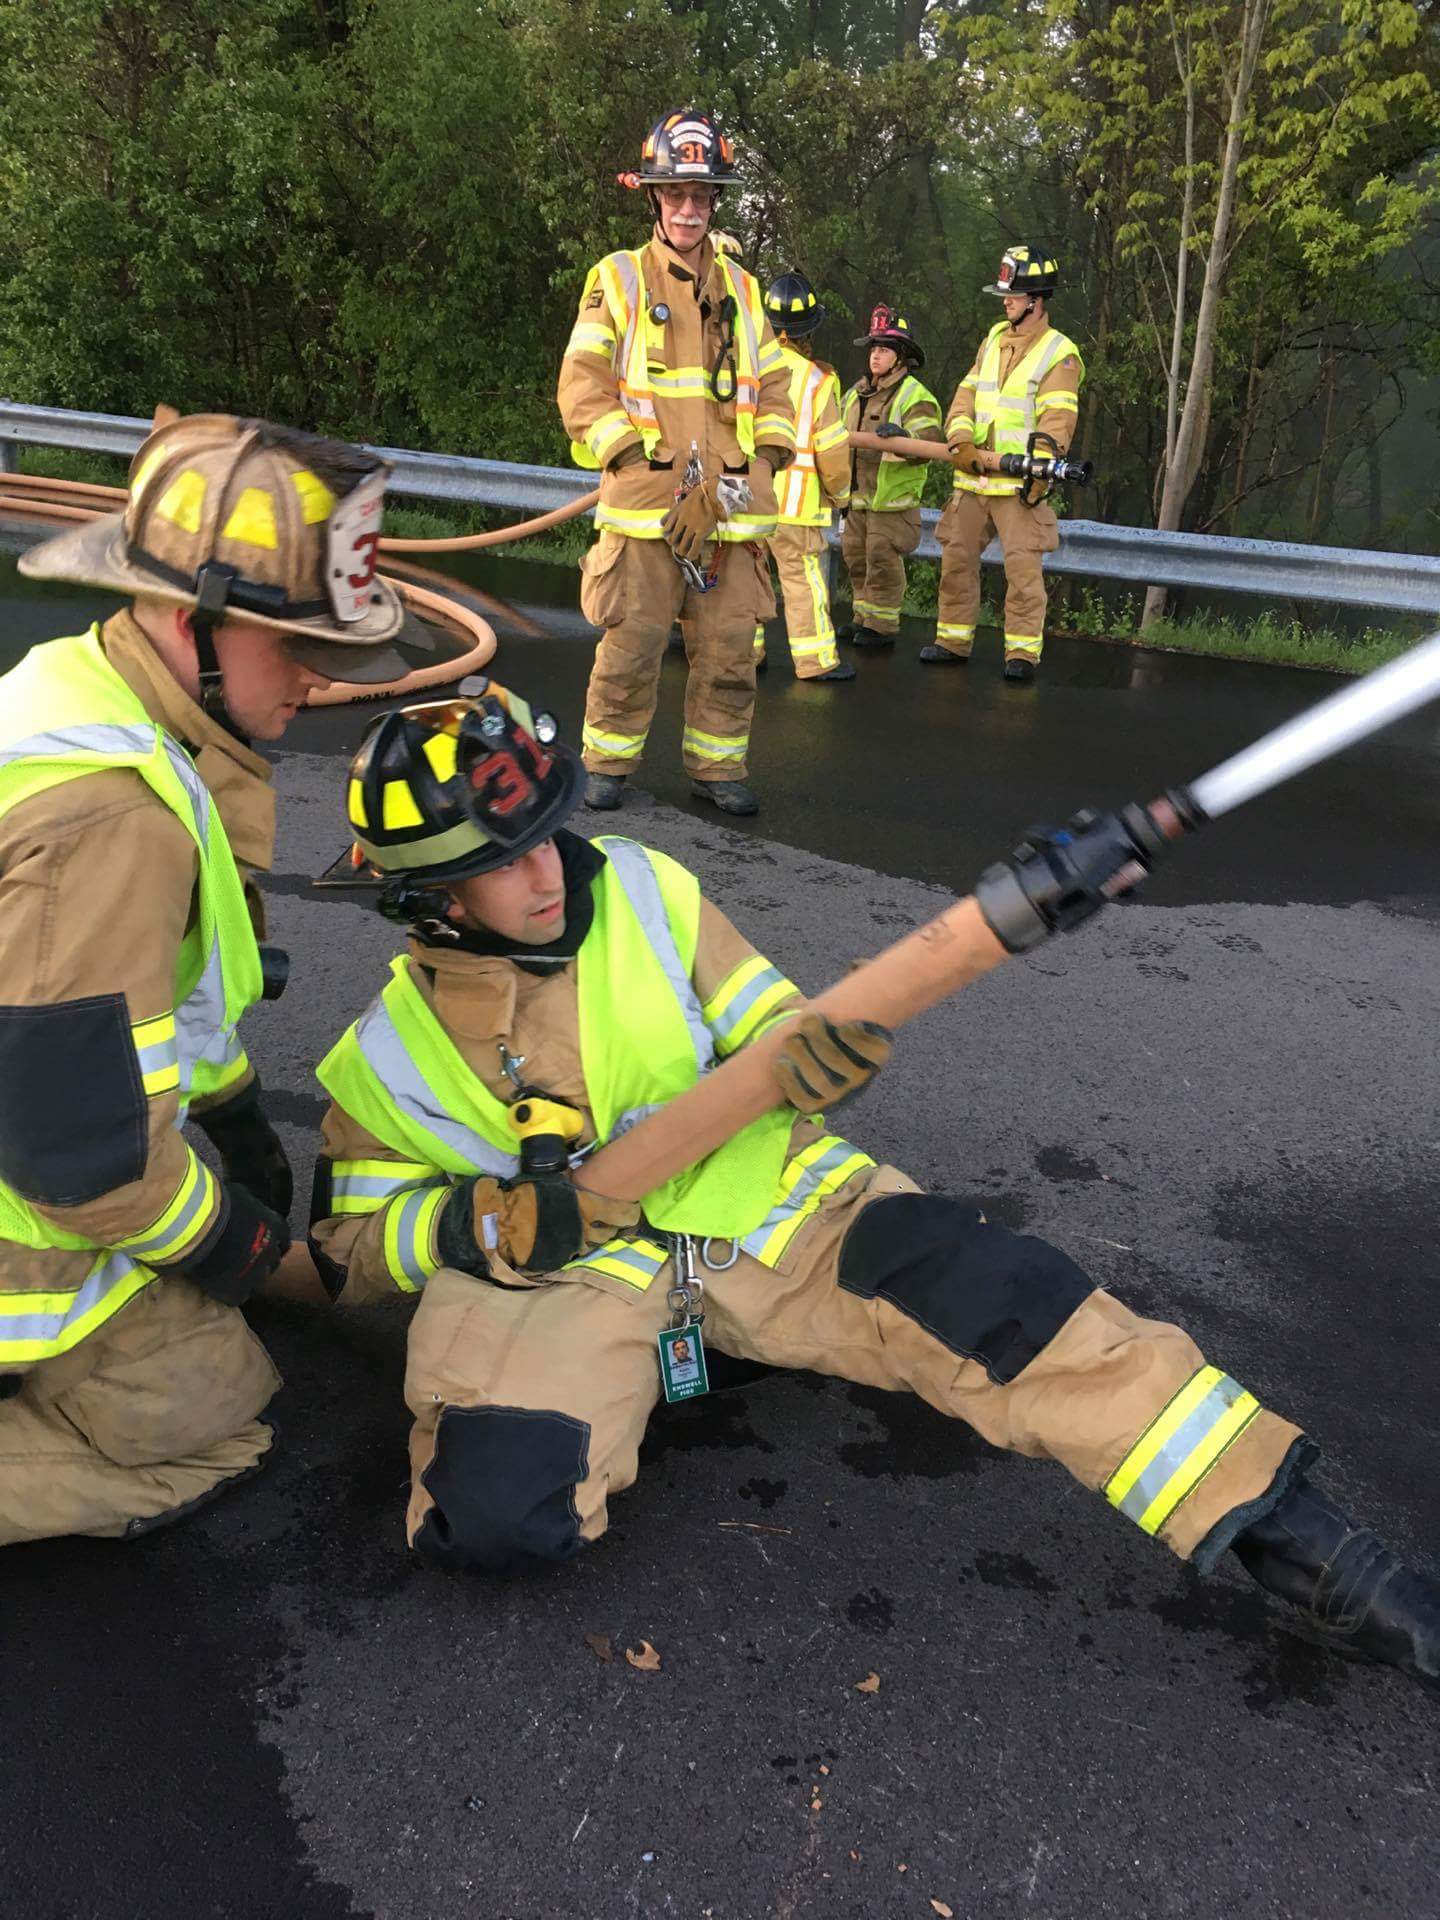 05-15-17  Training - Relay And Hose Lines